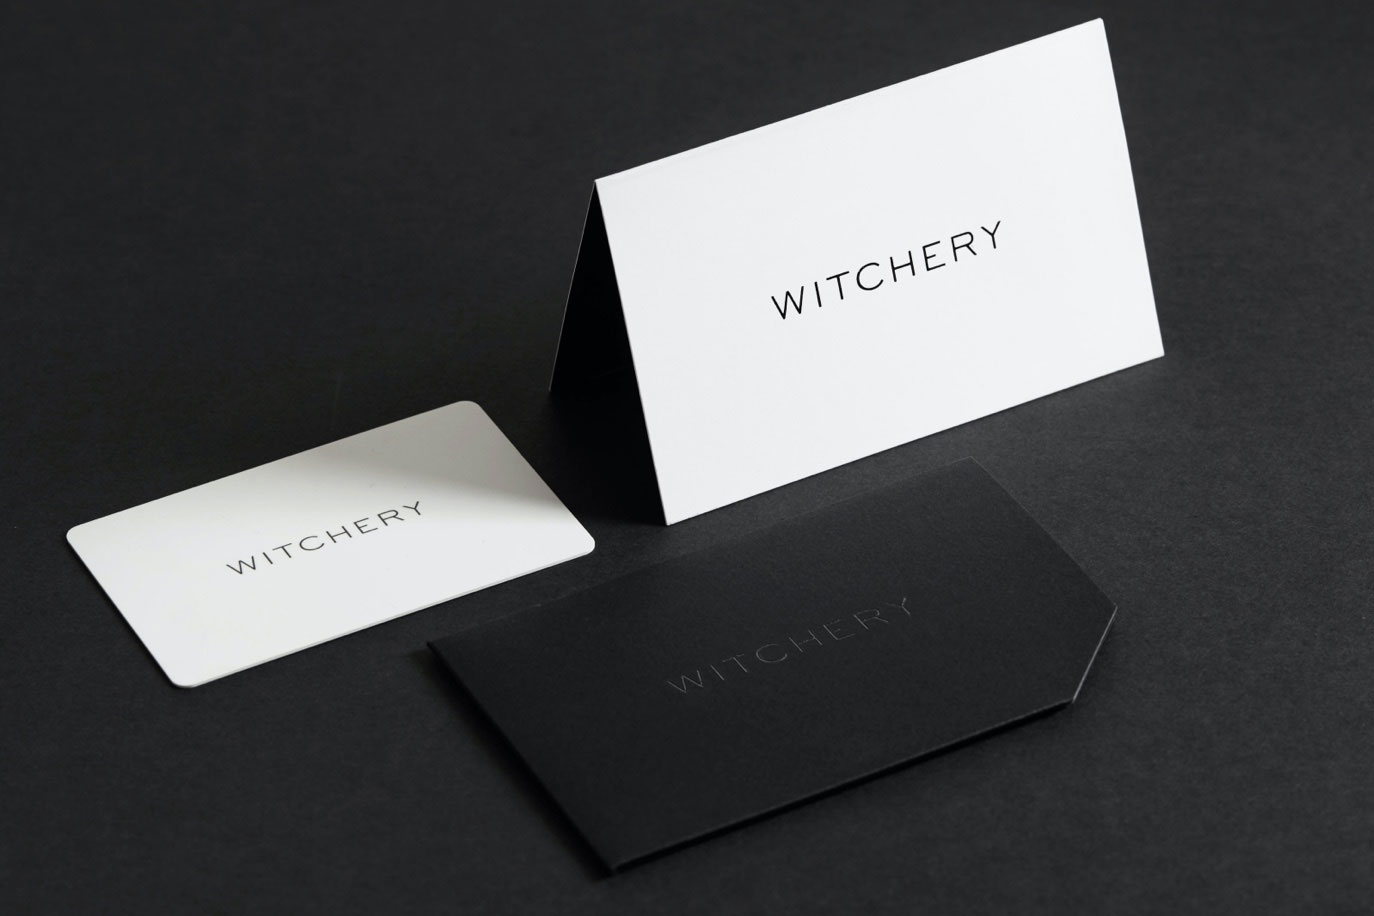 Withcery gift cards